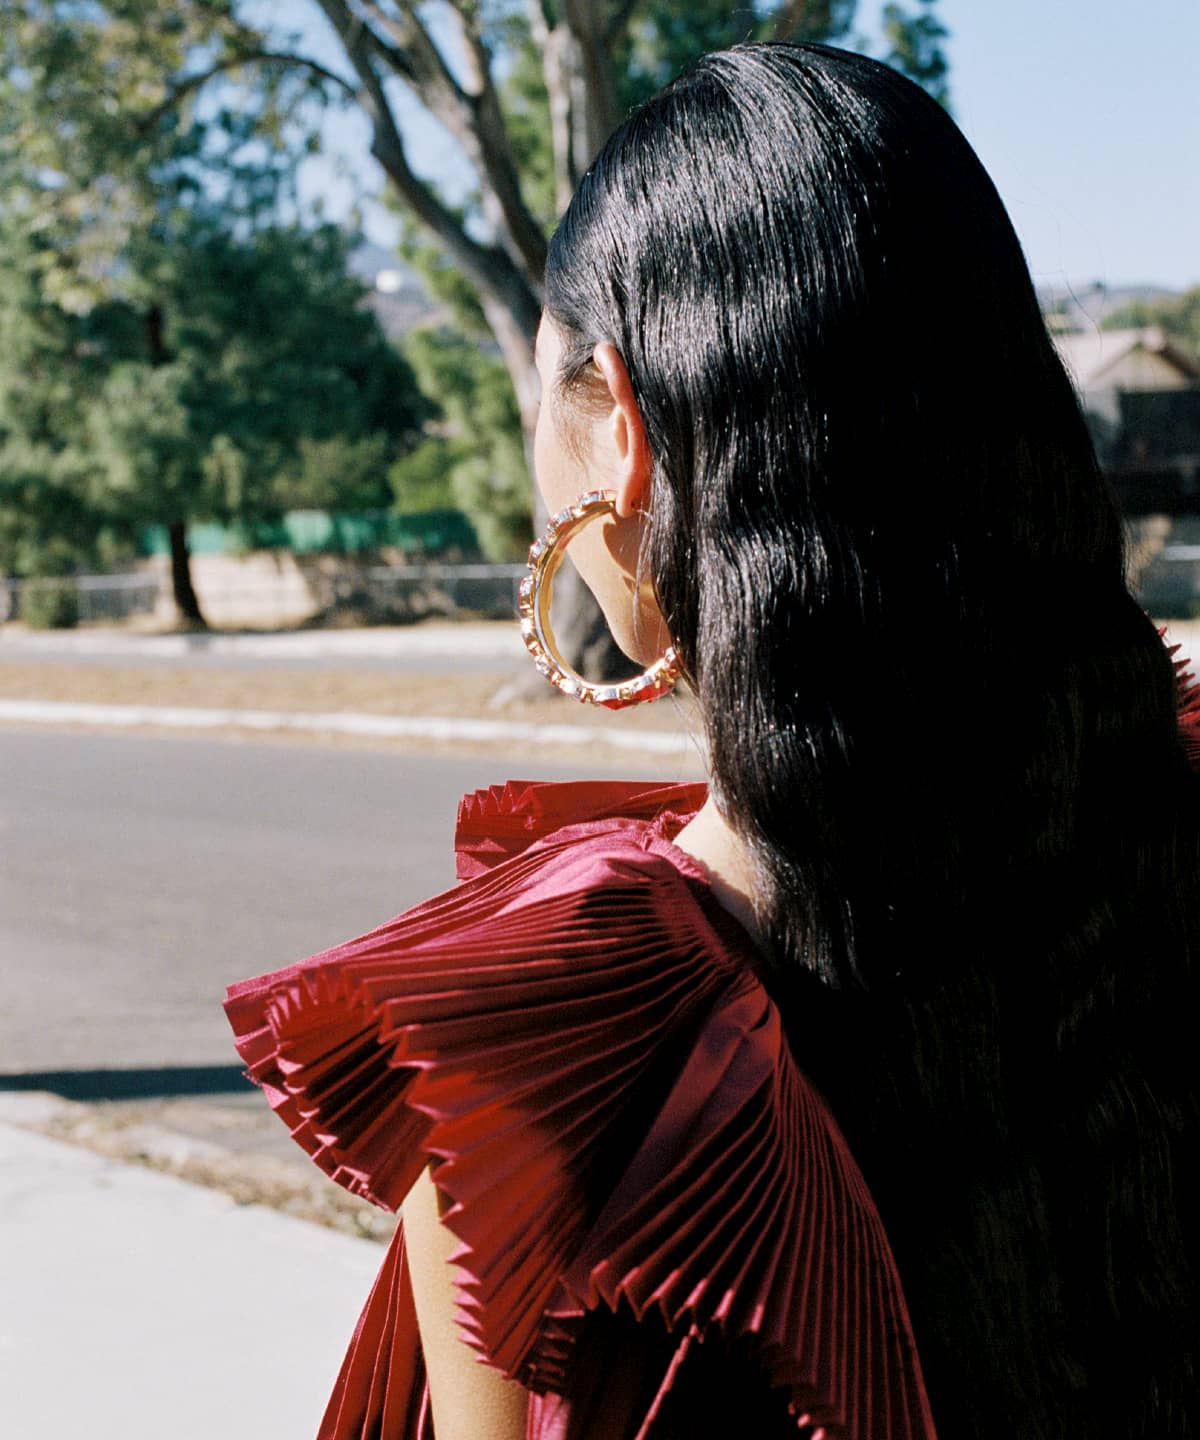 Model Ariel Toole with her back to the camera. She has long wavy brown hair and is wearing a red dress.